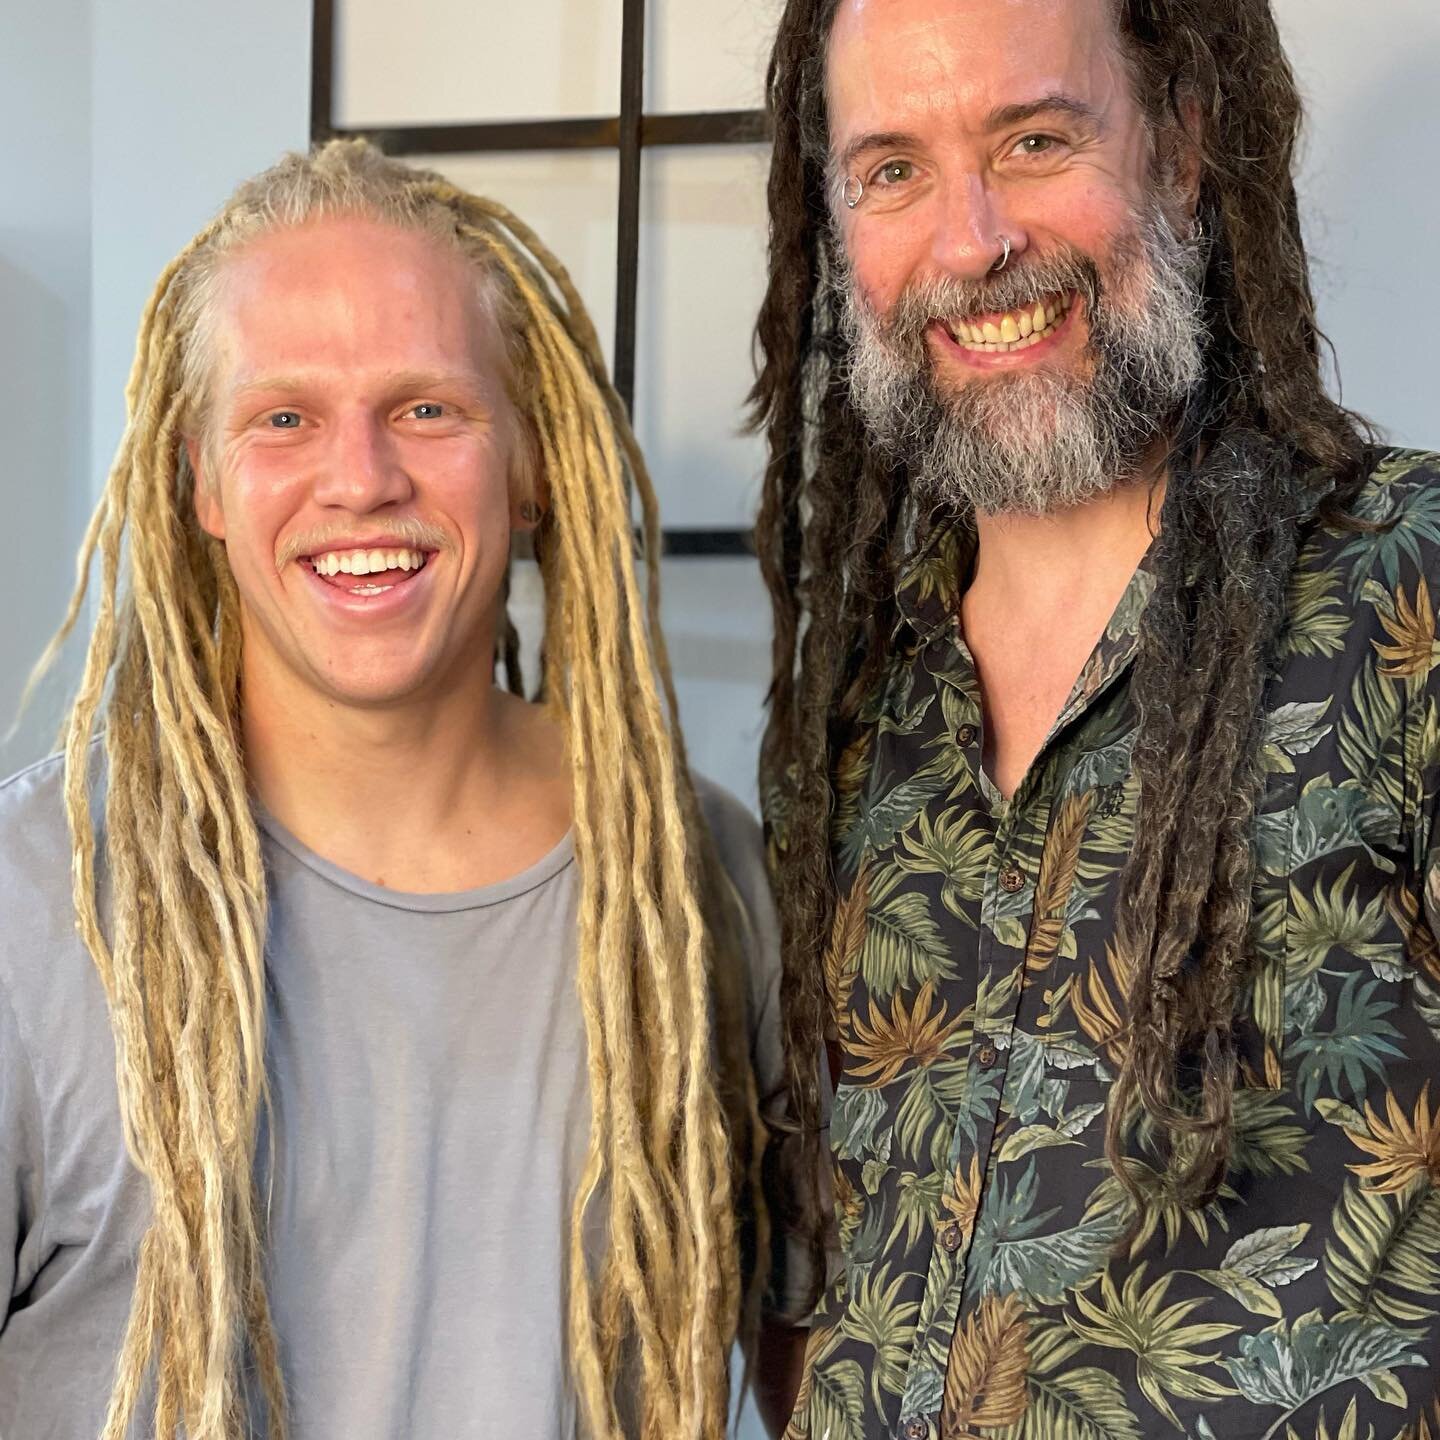 We love our clients! Scroll through to see Jack &amp; Ewans hair journey ➡️ 

The legend Jack has been seeing Ewan since he was a teeny tiny 9 year old, that&rsquo;s 15 years of dreads and dedication. 

Ewan has been giving Jacks dreads some love and